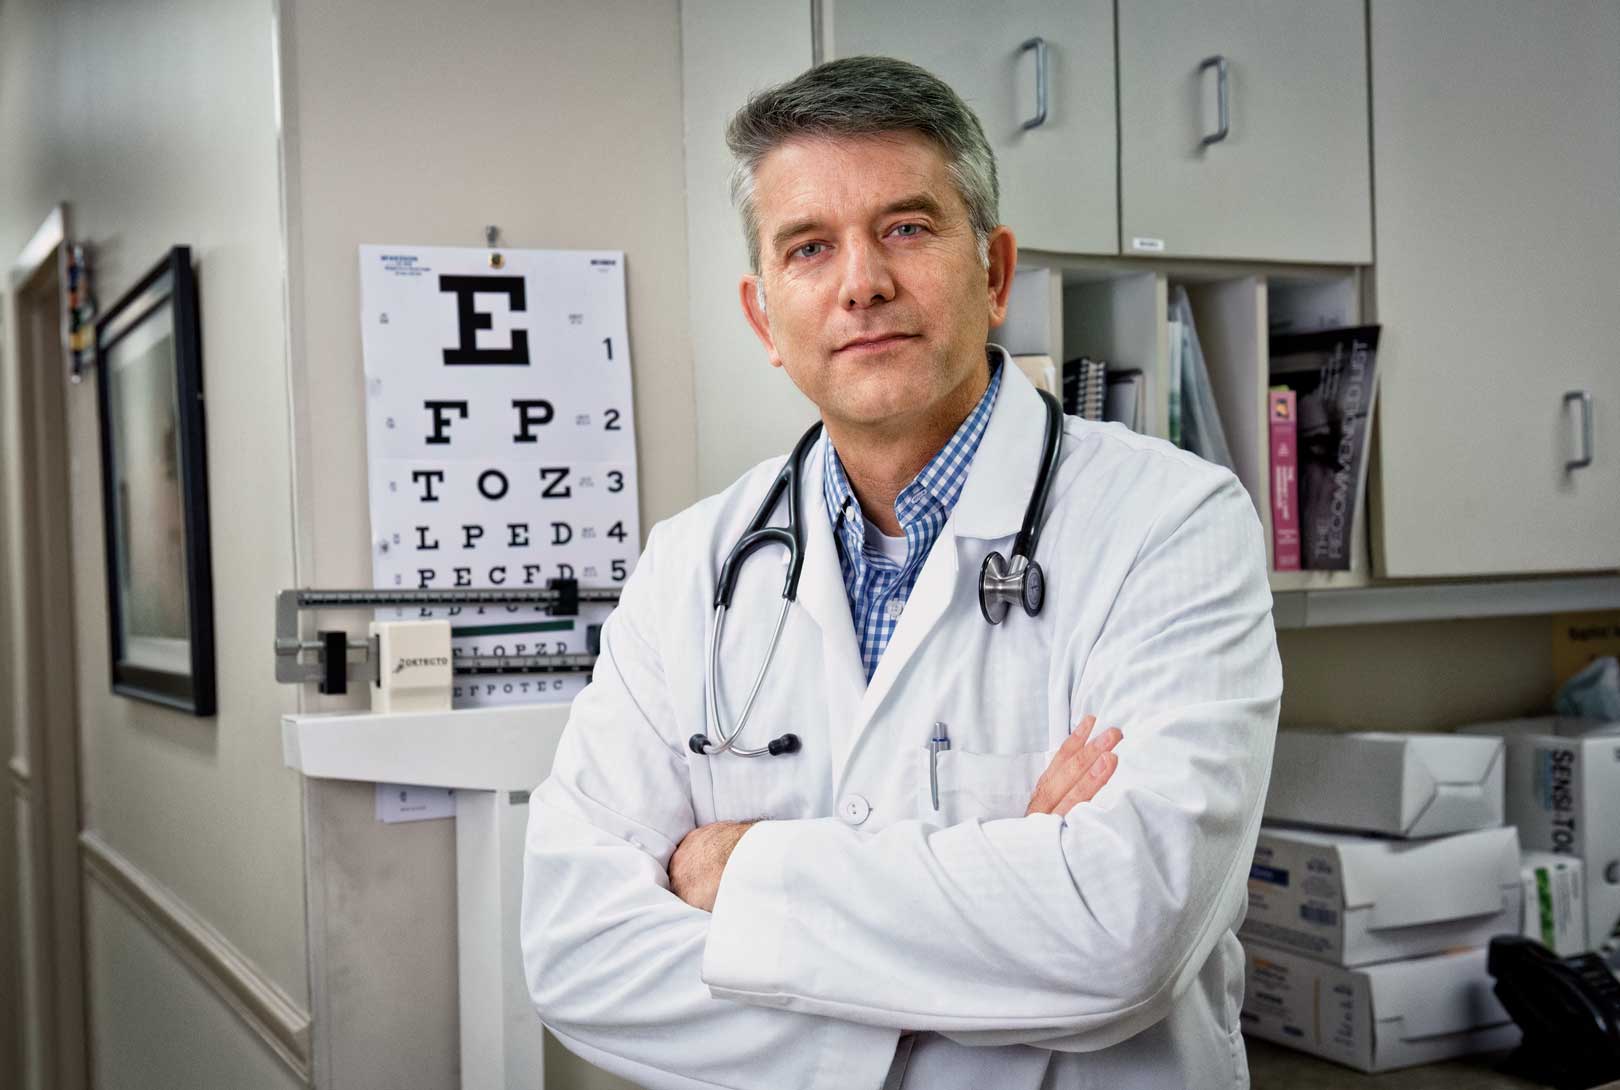 Dr. Parker Panovec wearing a lab coat standing in a clinic next to an eye chart